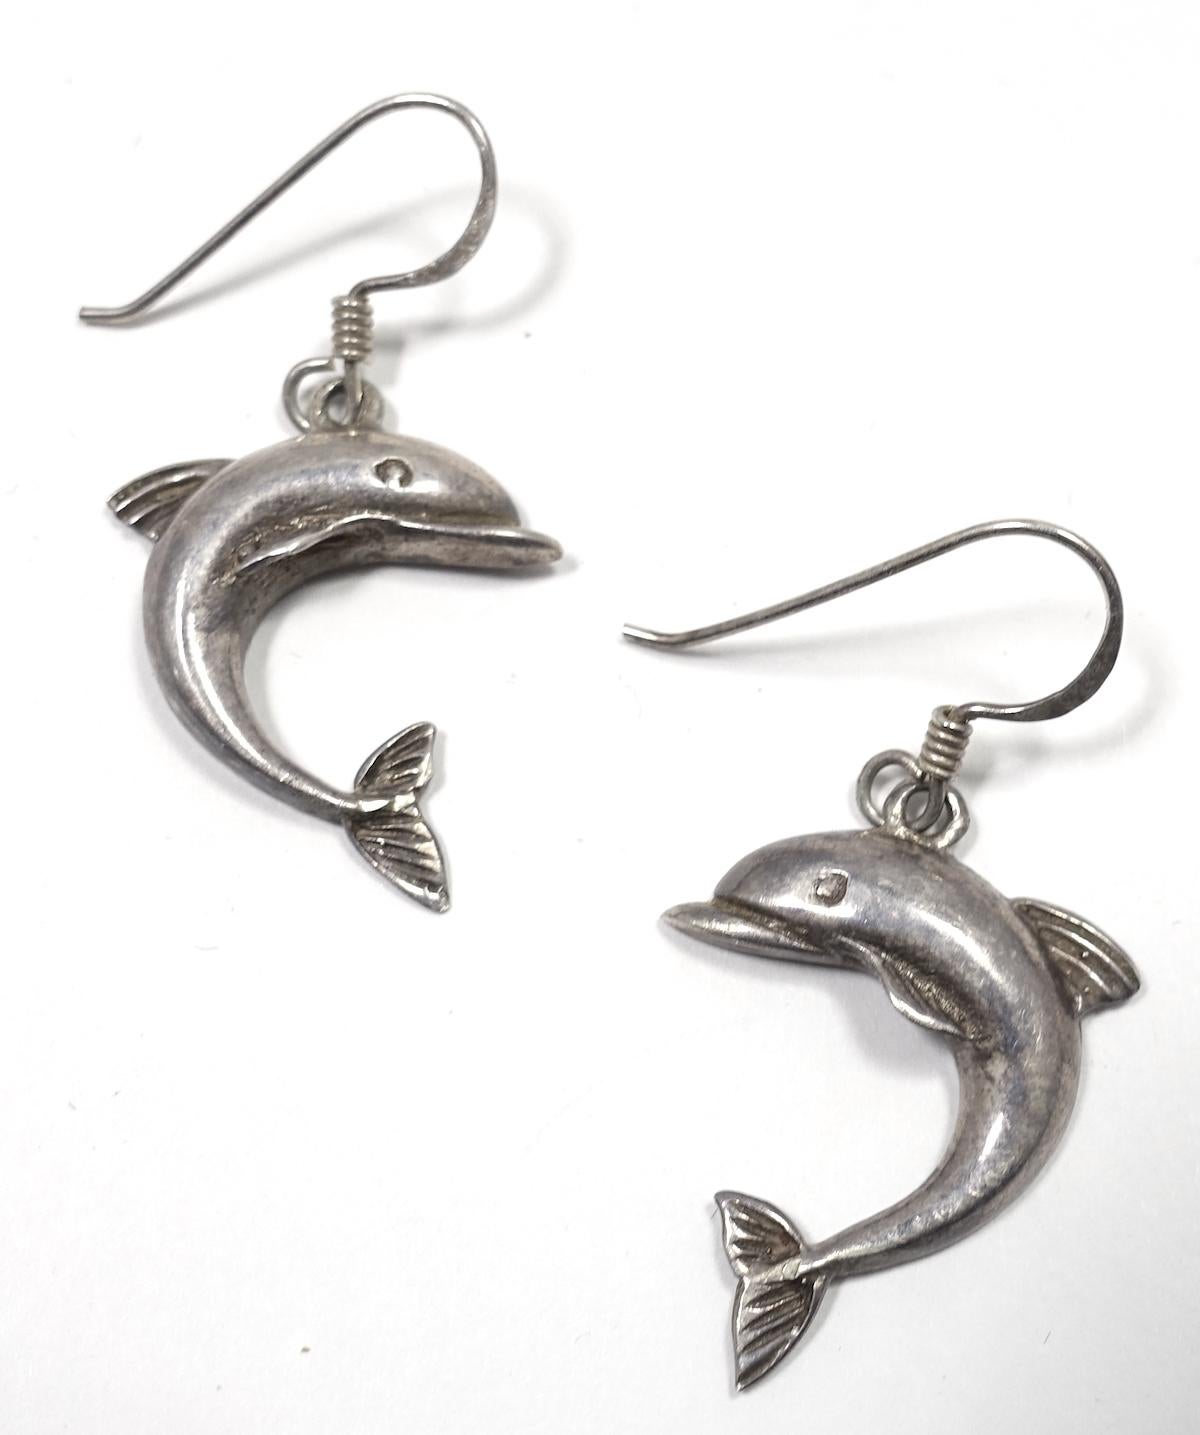 These vintage earrings feature cute dolphins in sterling silver.  These pierced earrings measure 1-1/2” x 3/4” and are in excellent condition.